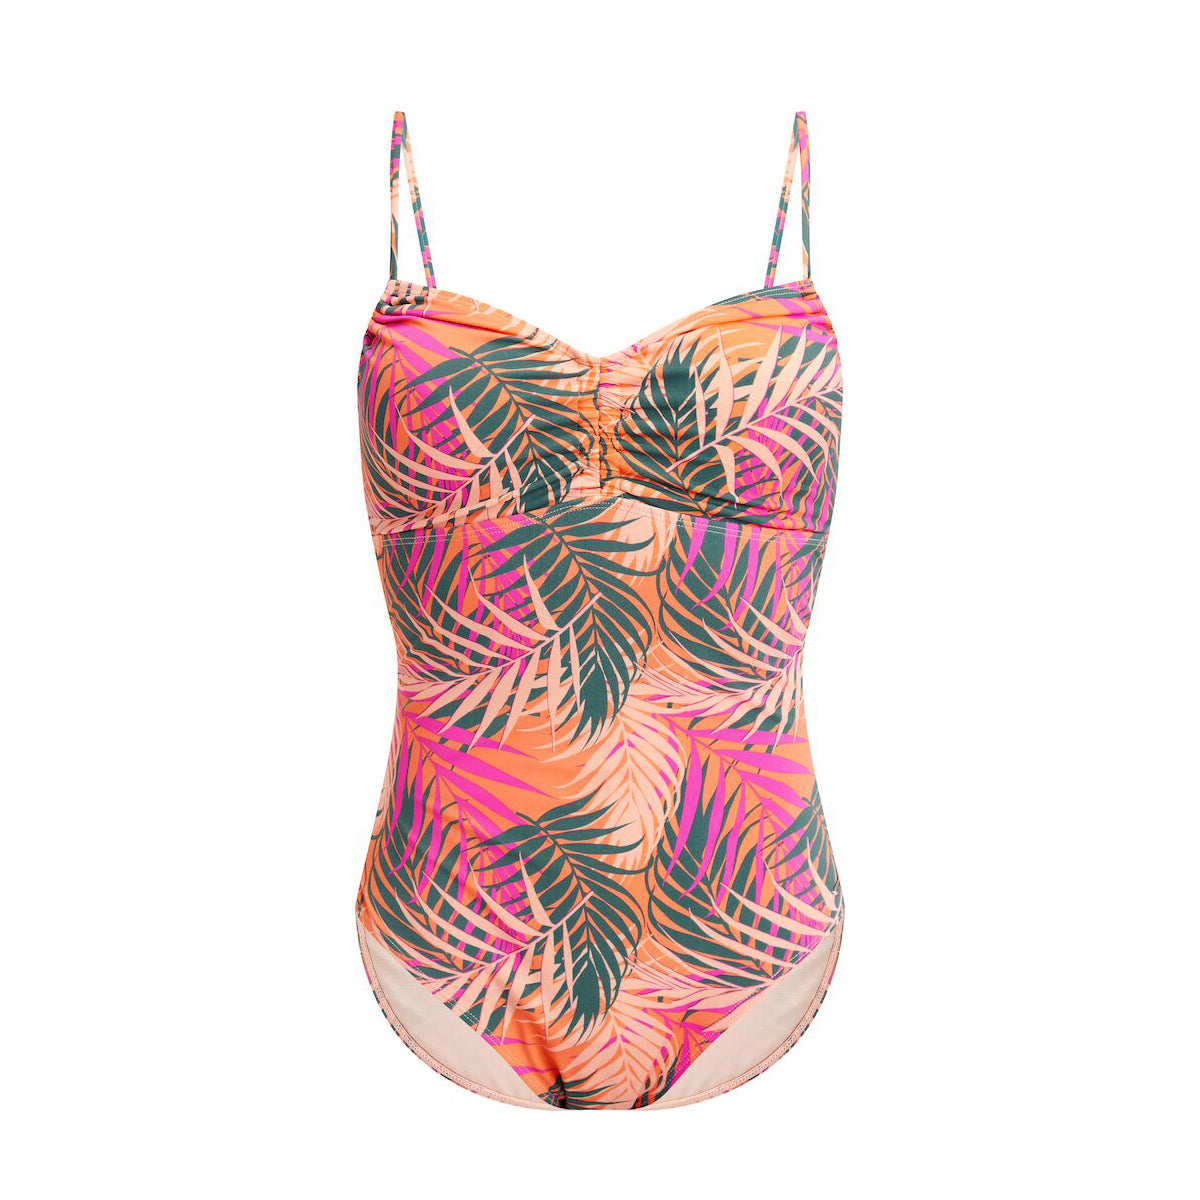 Firefly Sylvia Swimsuit For Women, Assorted Colors